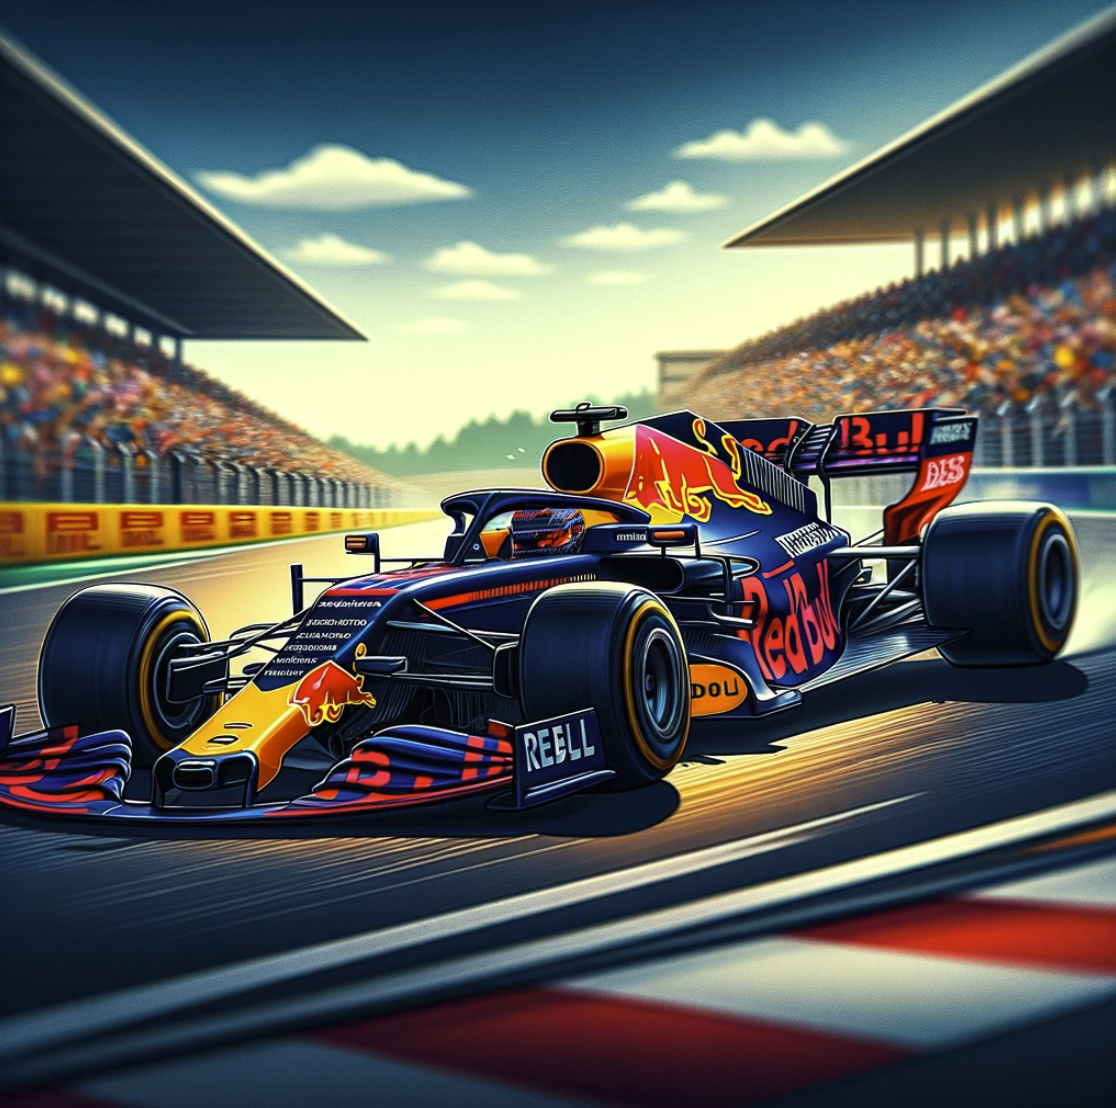 image featuring a Red Bull Formula 1 racing car as you requested. It captures the dynamic and competitive spirit of Formula 1 racing